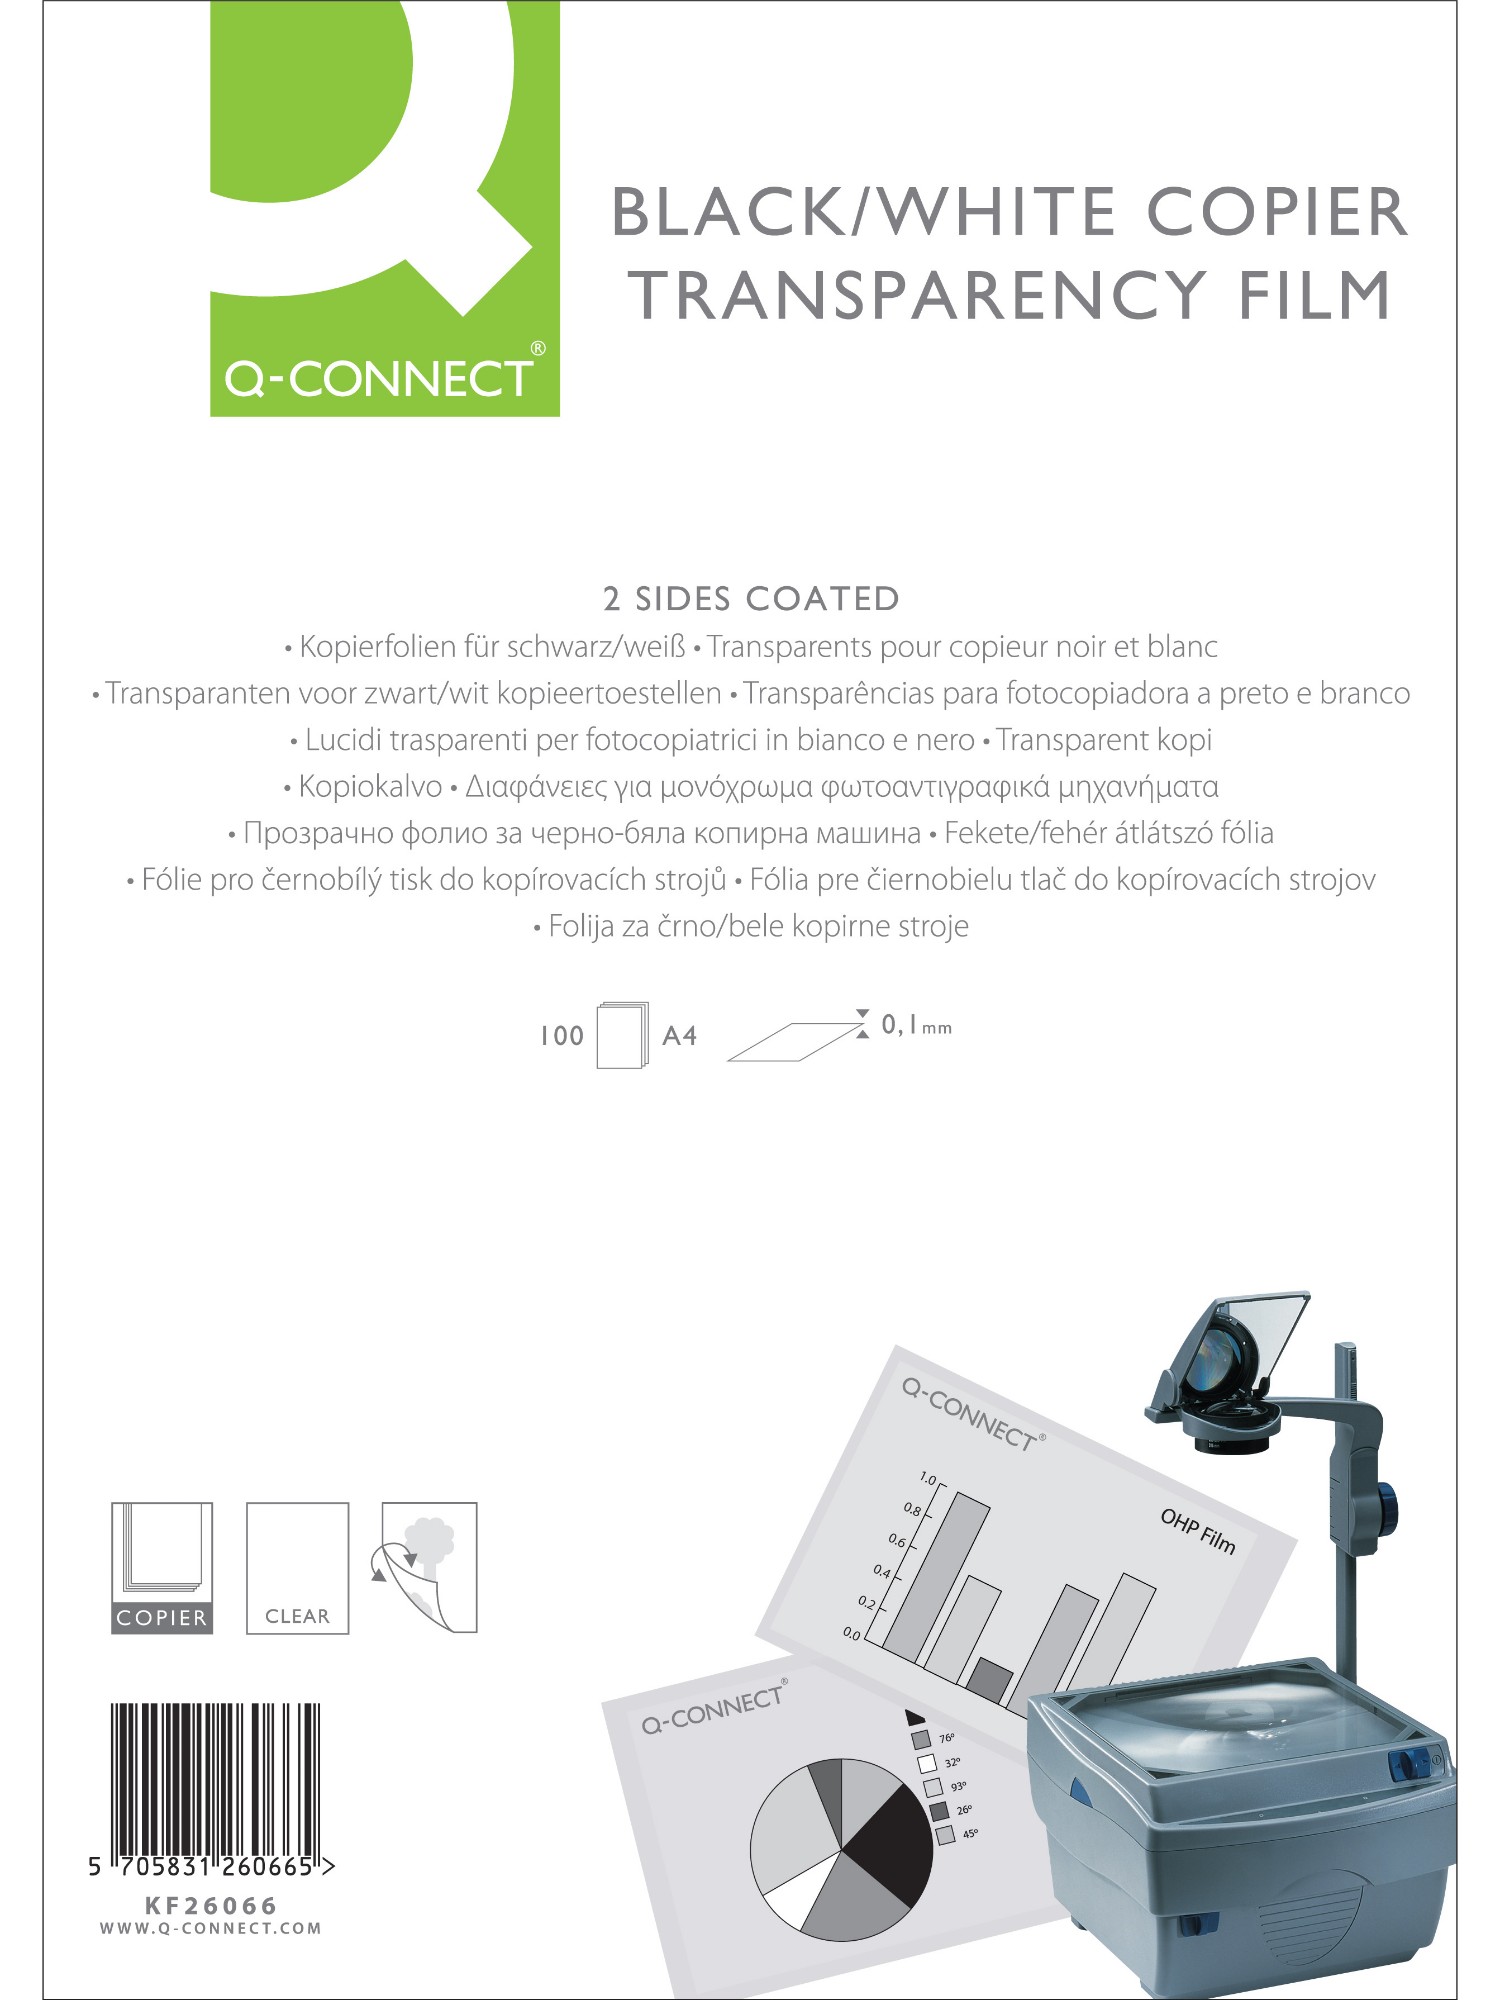 Q-CONNECT KF26066 printing paper